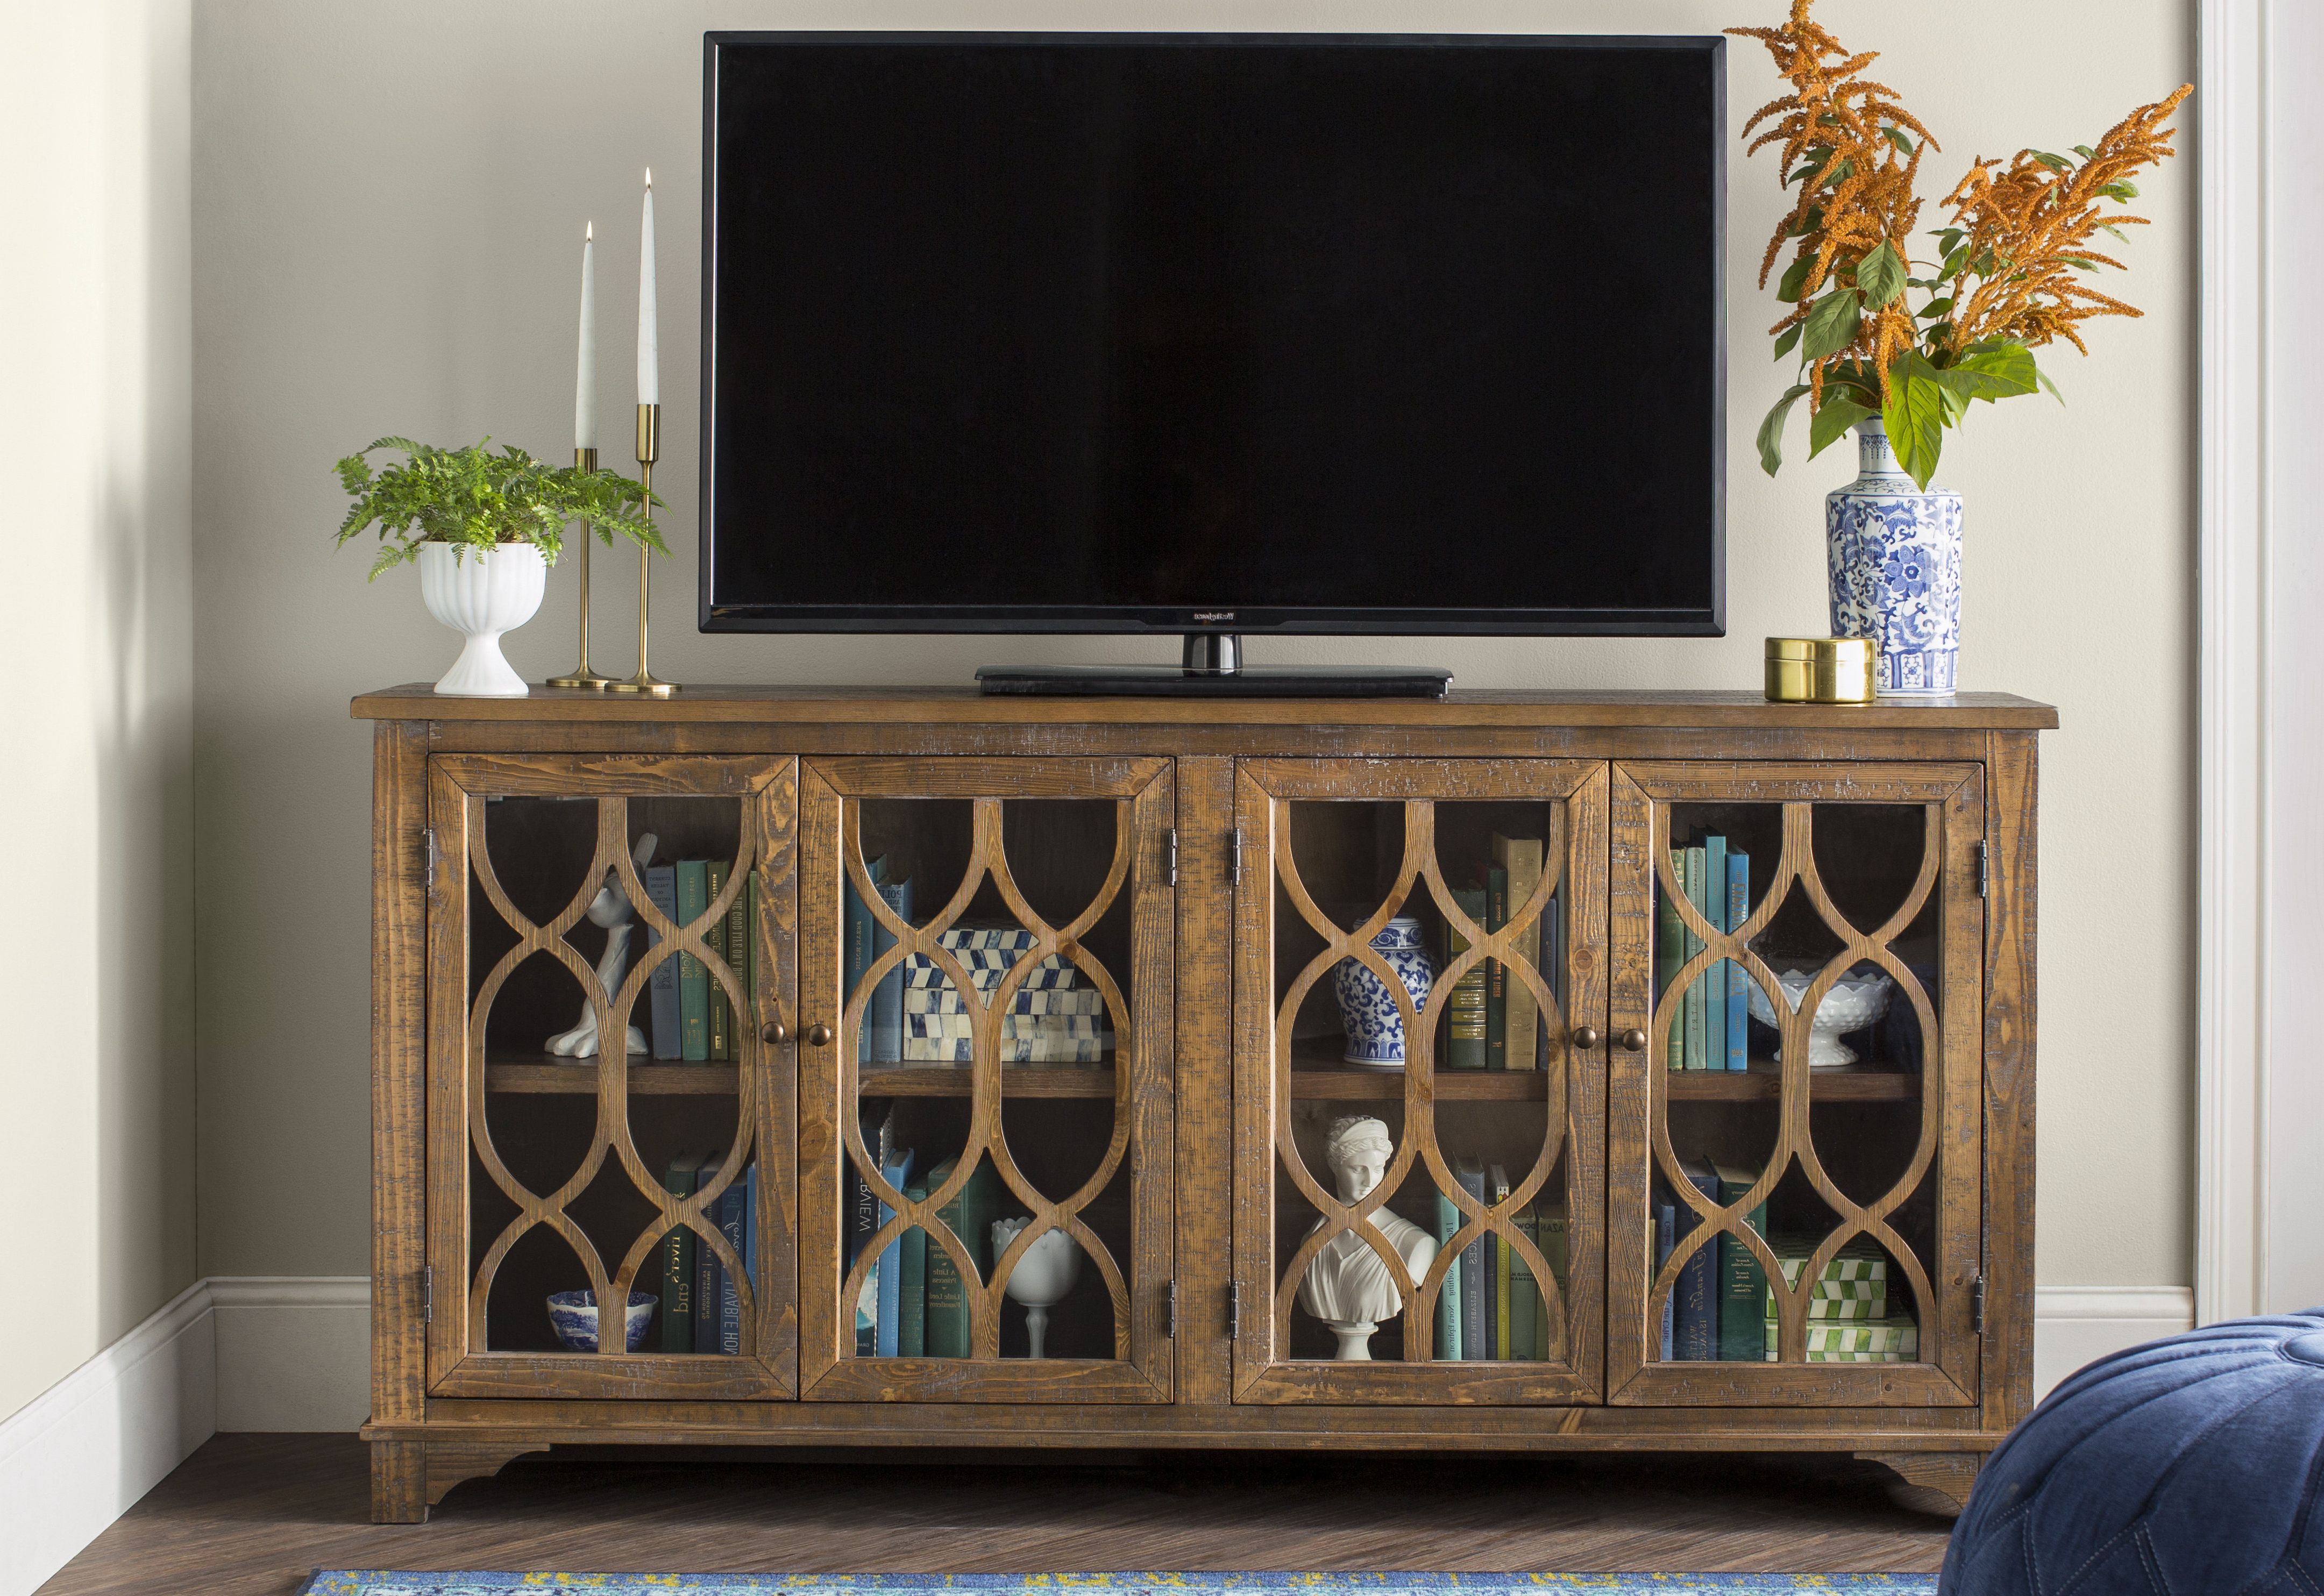 Most Recent Tall Tv Stands You'll Love (View 15 of 20)